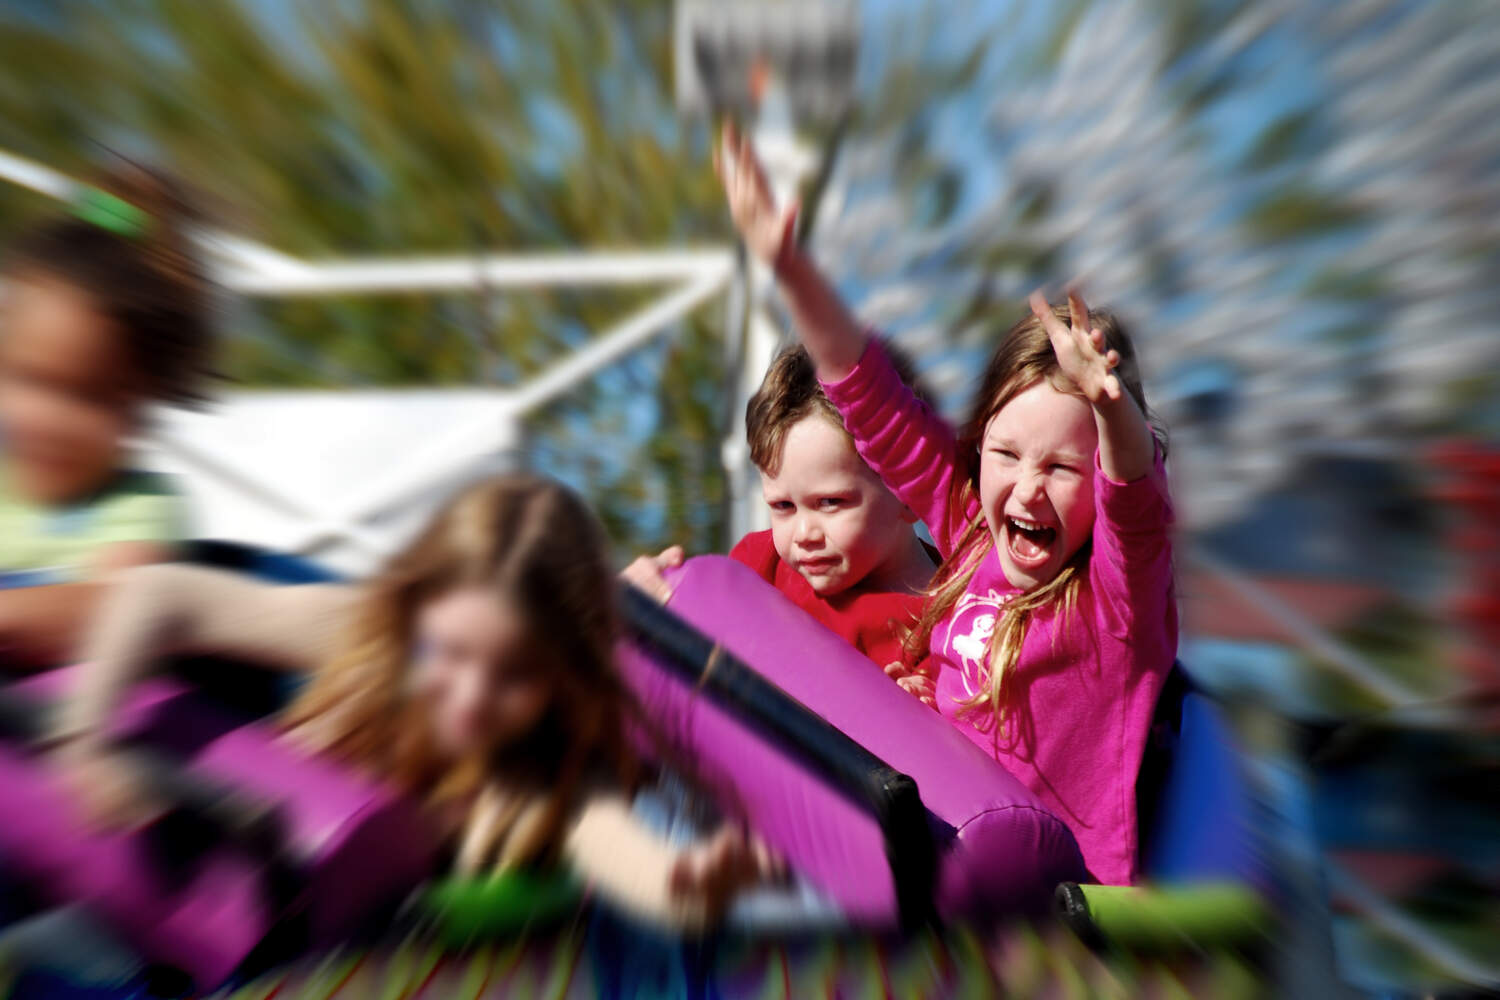 Hyposensitive kids show preference for highly energetic spaces such as amusement park